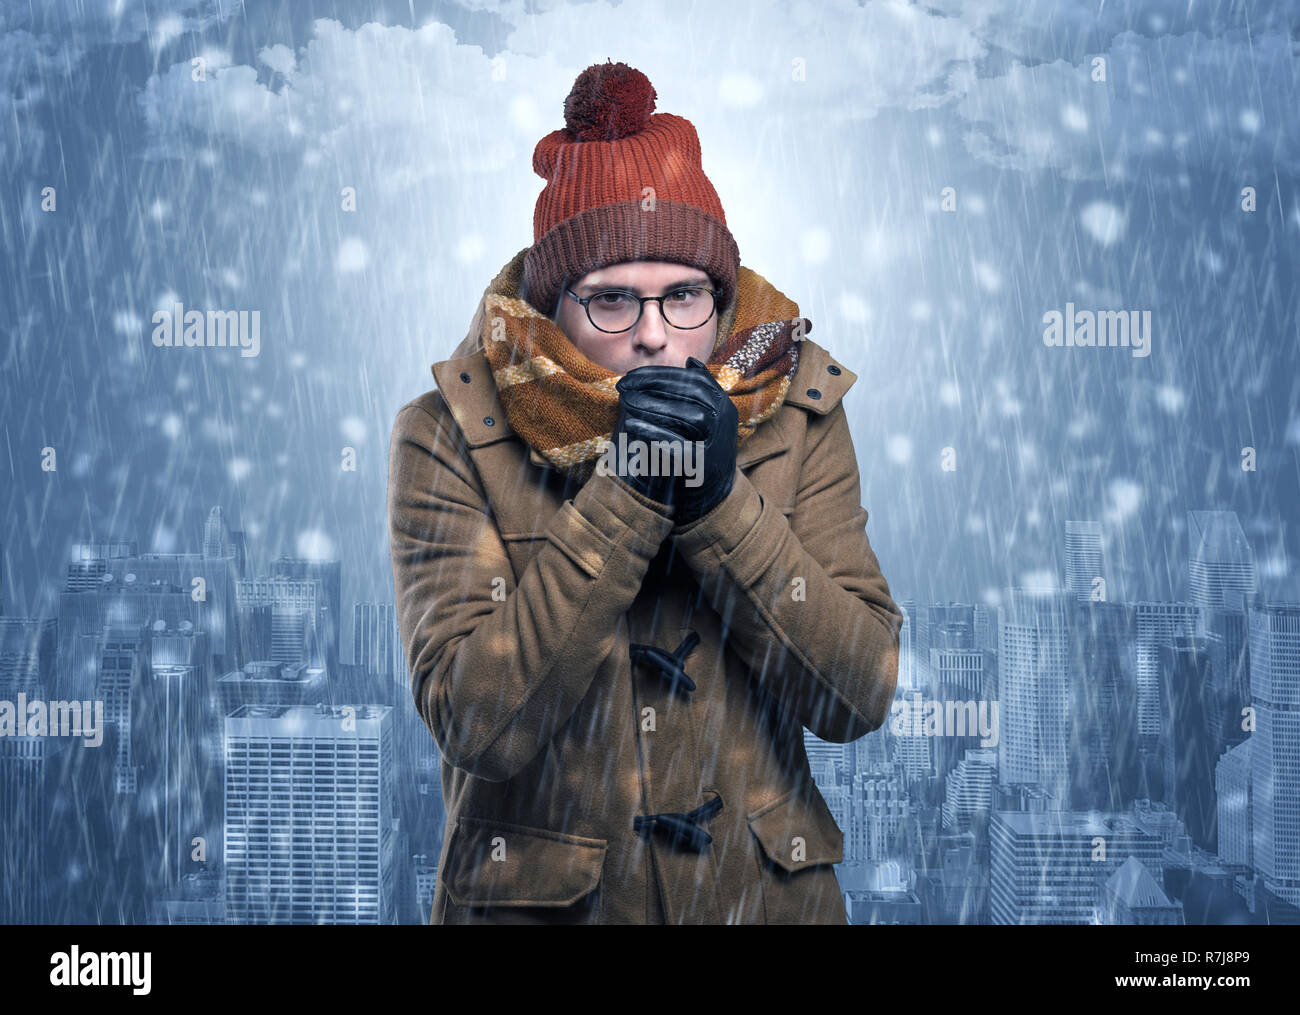 Young man freezing in warm clothing with city concept  Stock Photo